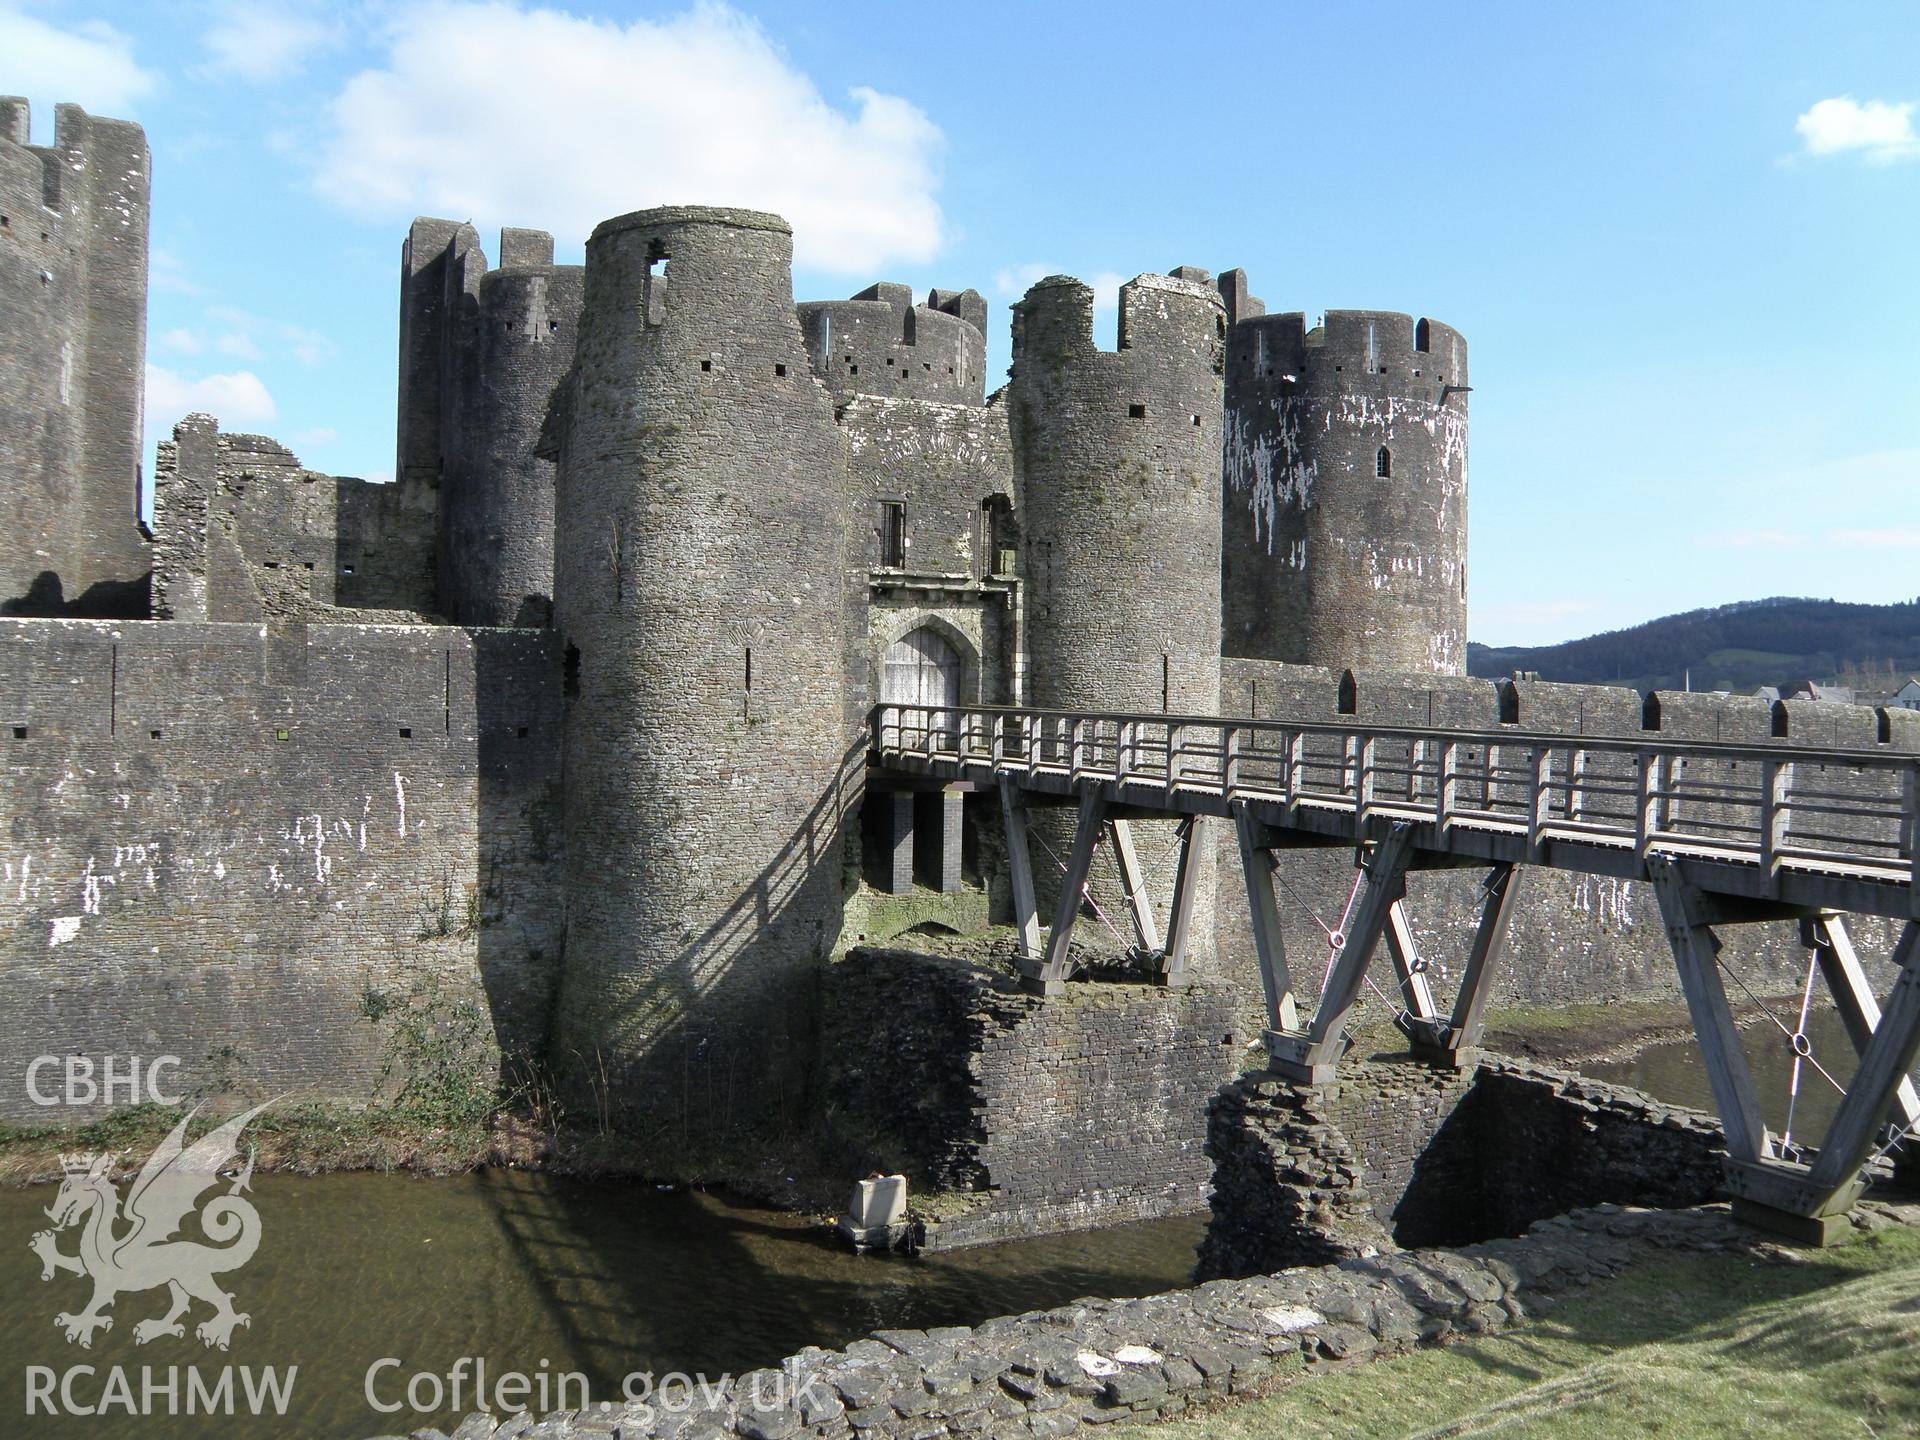 Colour photo of Caerphilly Castle, taken by Paul R. Davis, 31st March 2013.